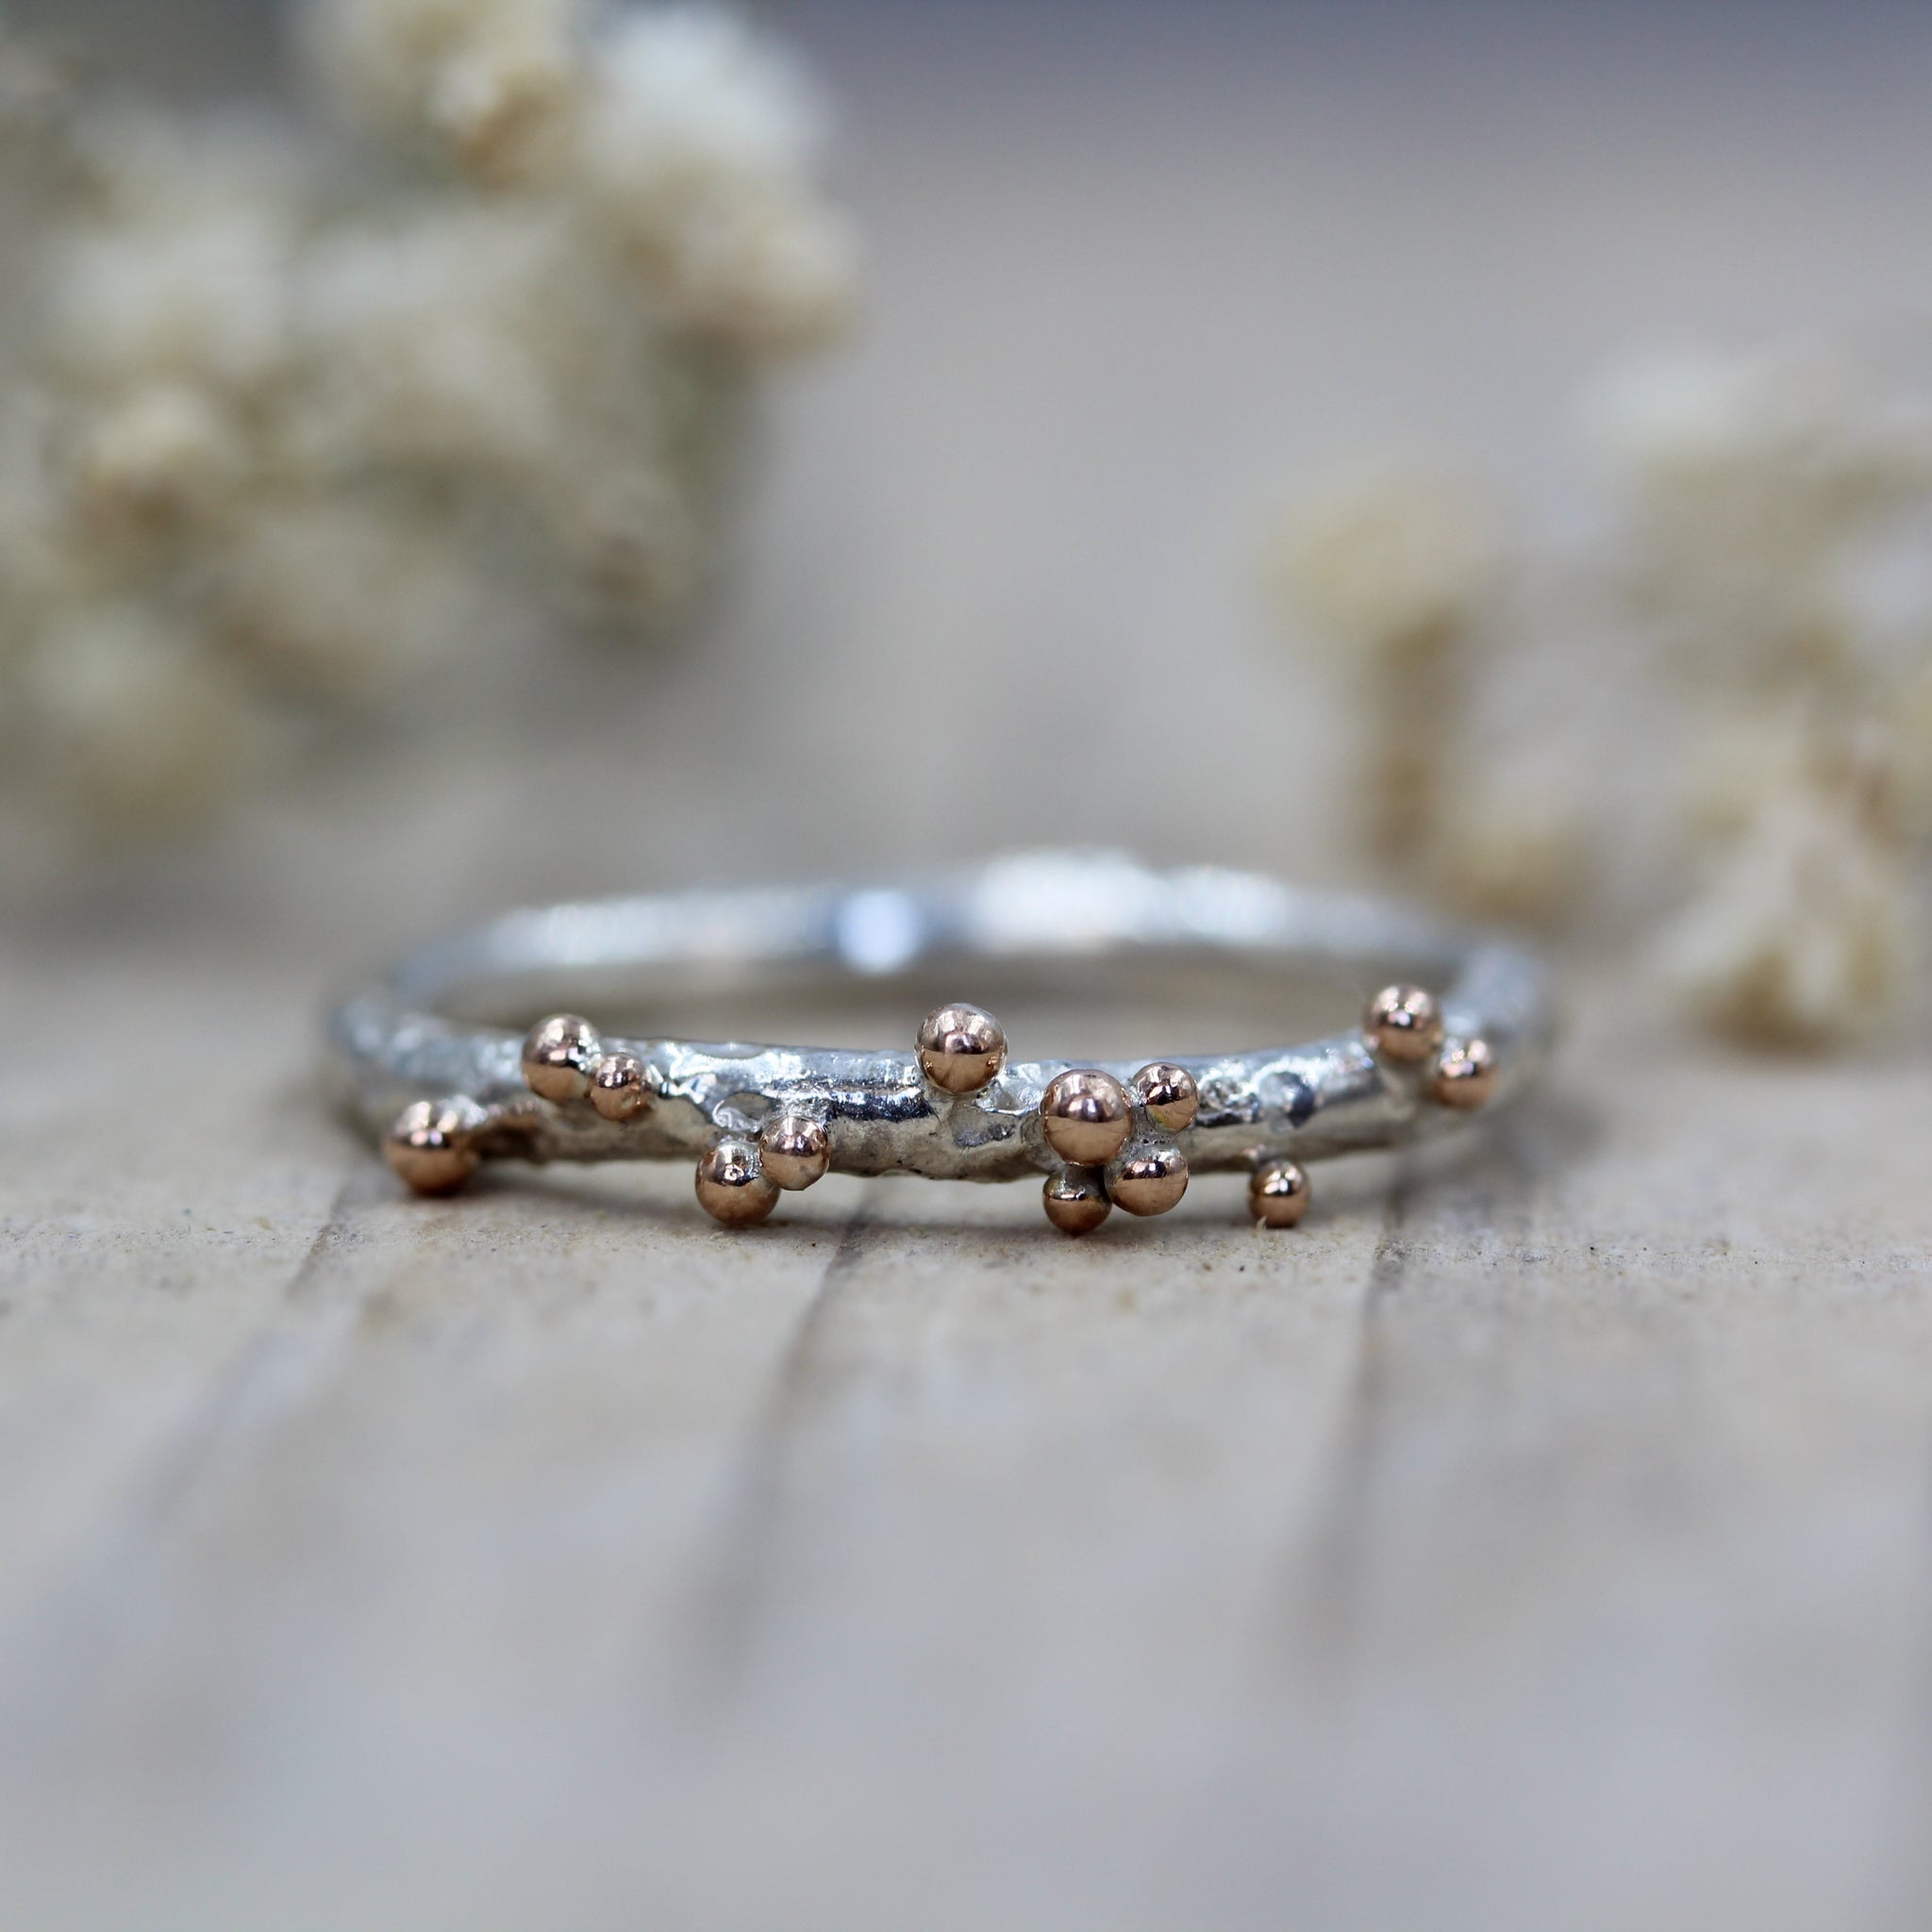 Silver and rose gold sea inspired ring, handmade in recycled metals 